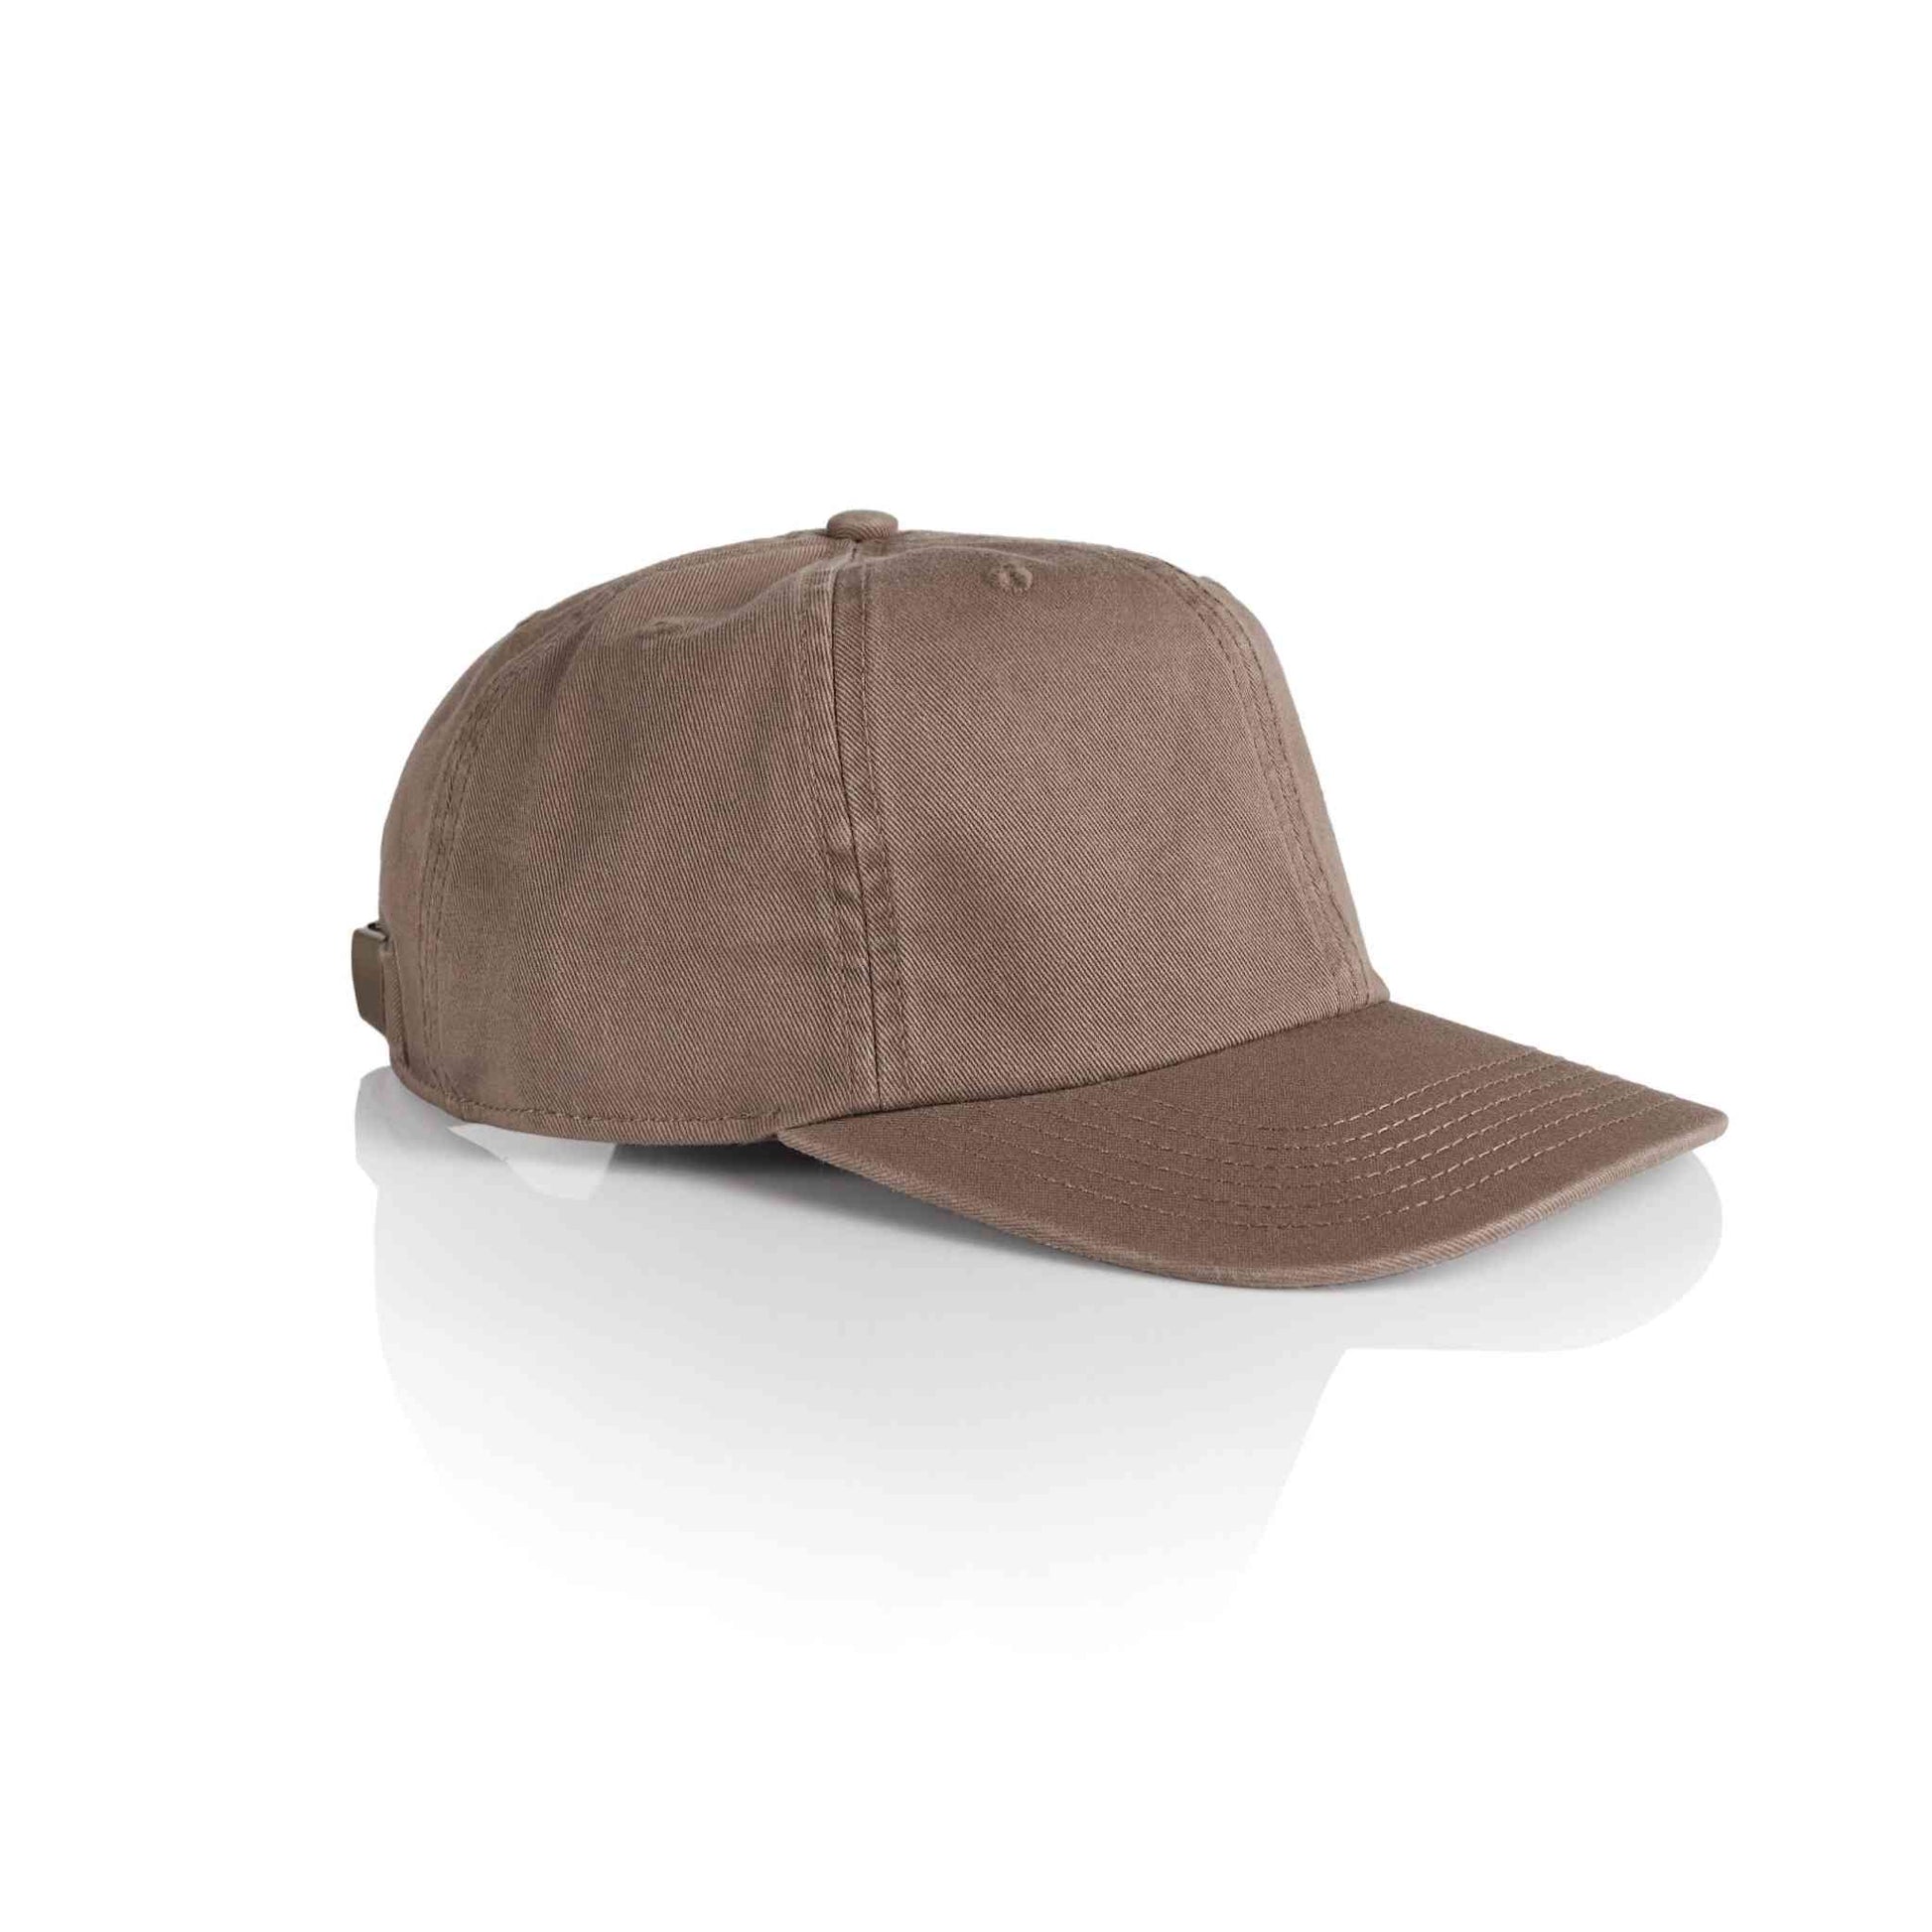 AS Colour 1116 James 6 panel cap in coffee colour, side view